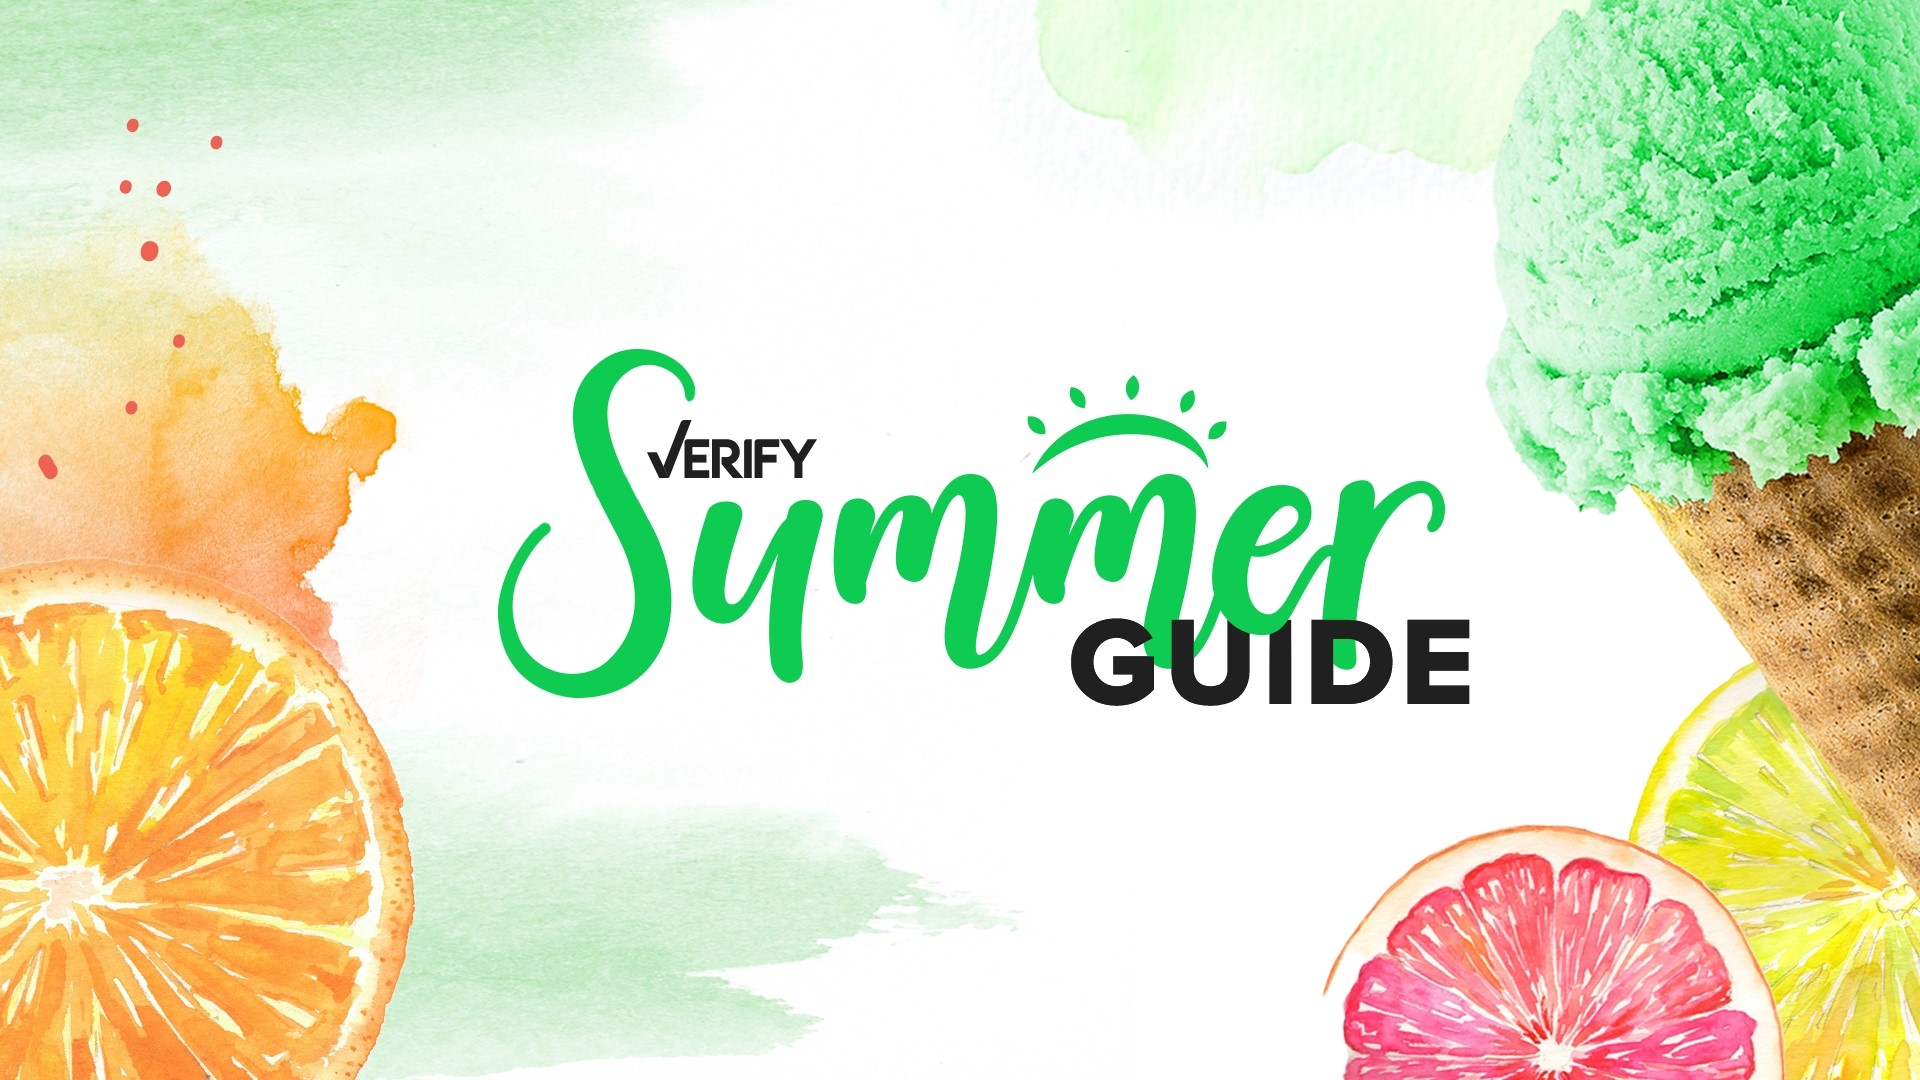 VERIFY's ultimate guide has tips on how to stay safe and have fun this summer.